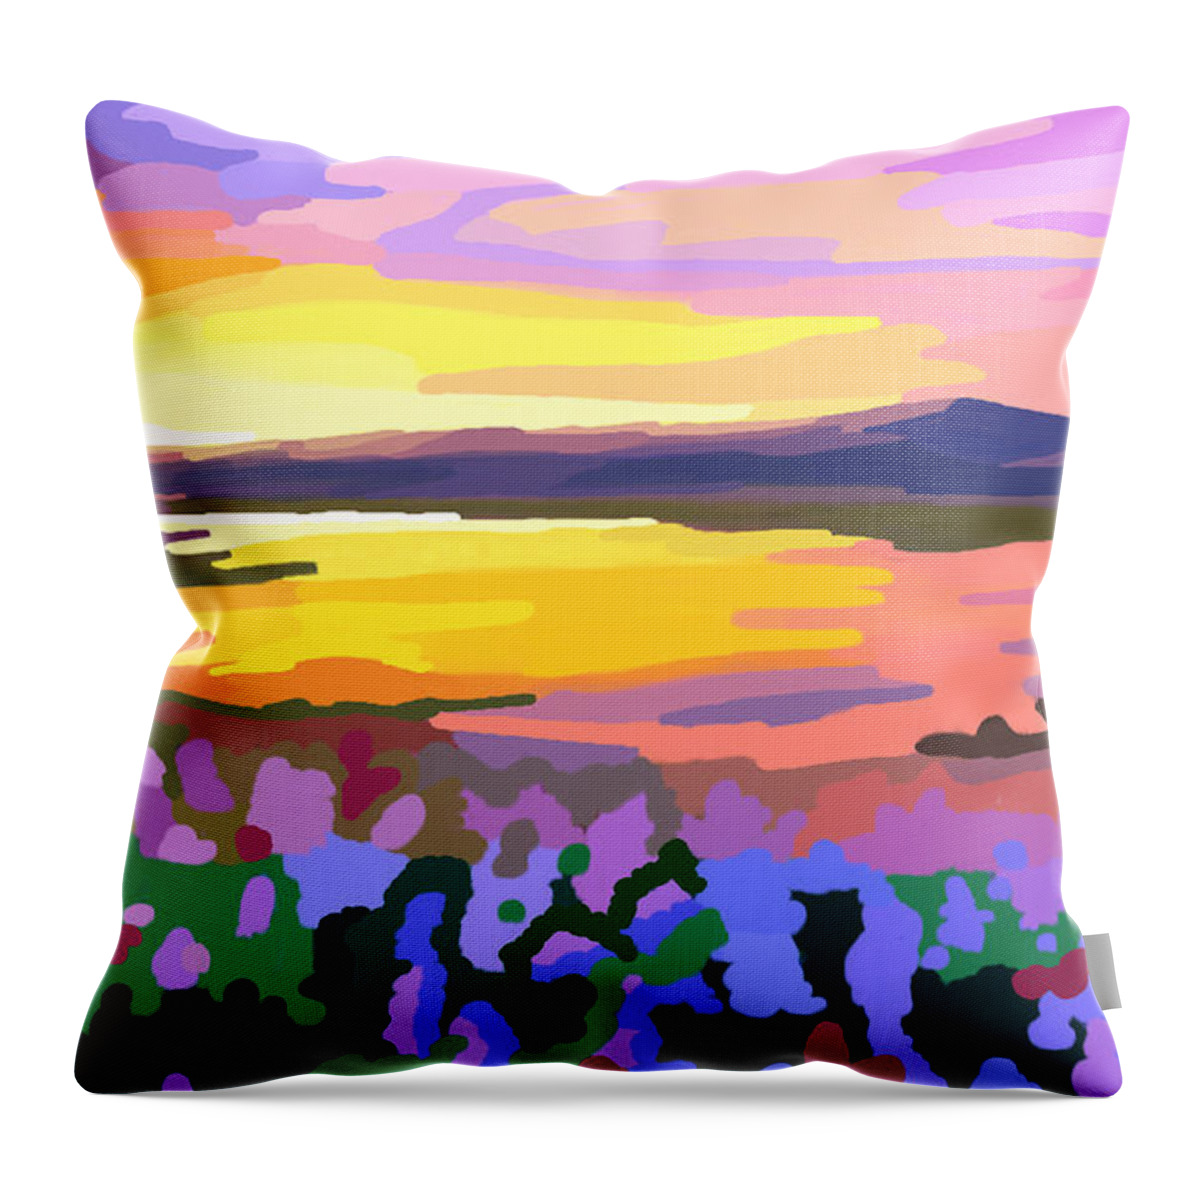 Sweet Day Throw Pillow featuring the digital art Brilliant Evening by Anthony Mwangi